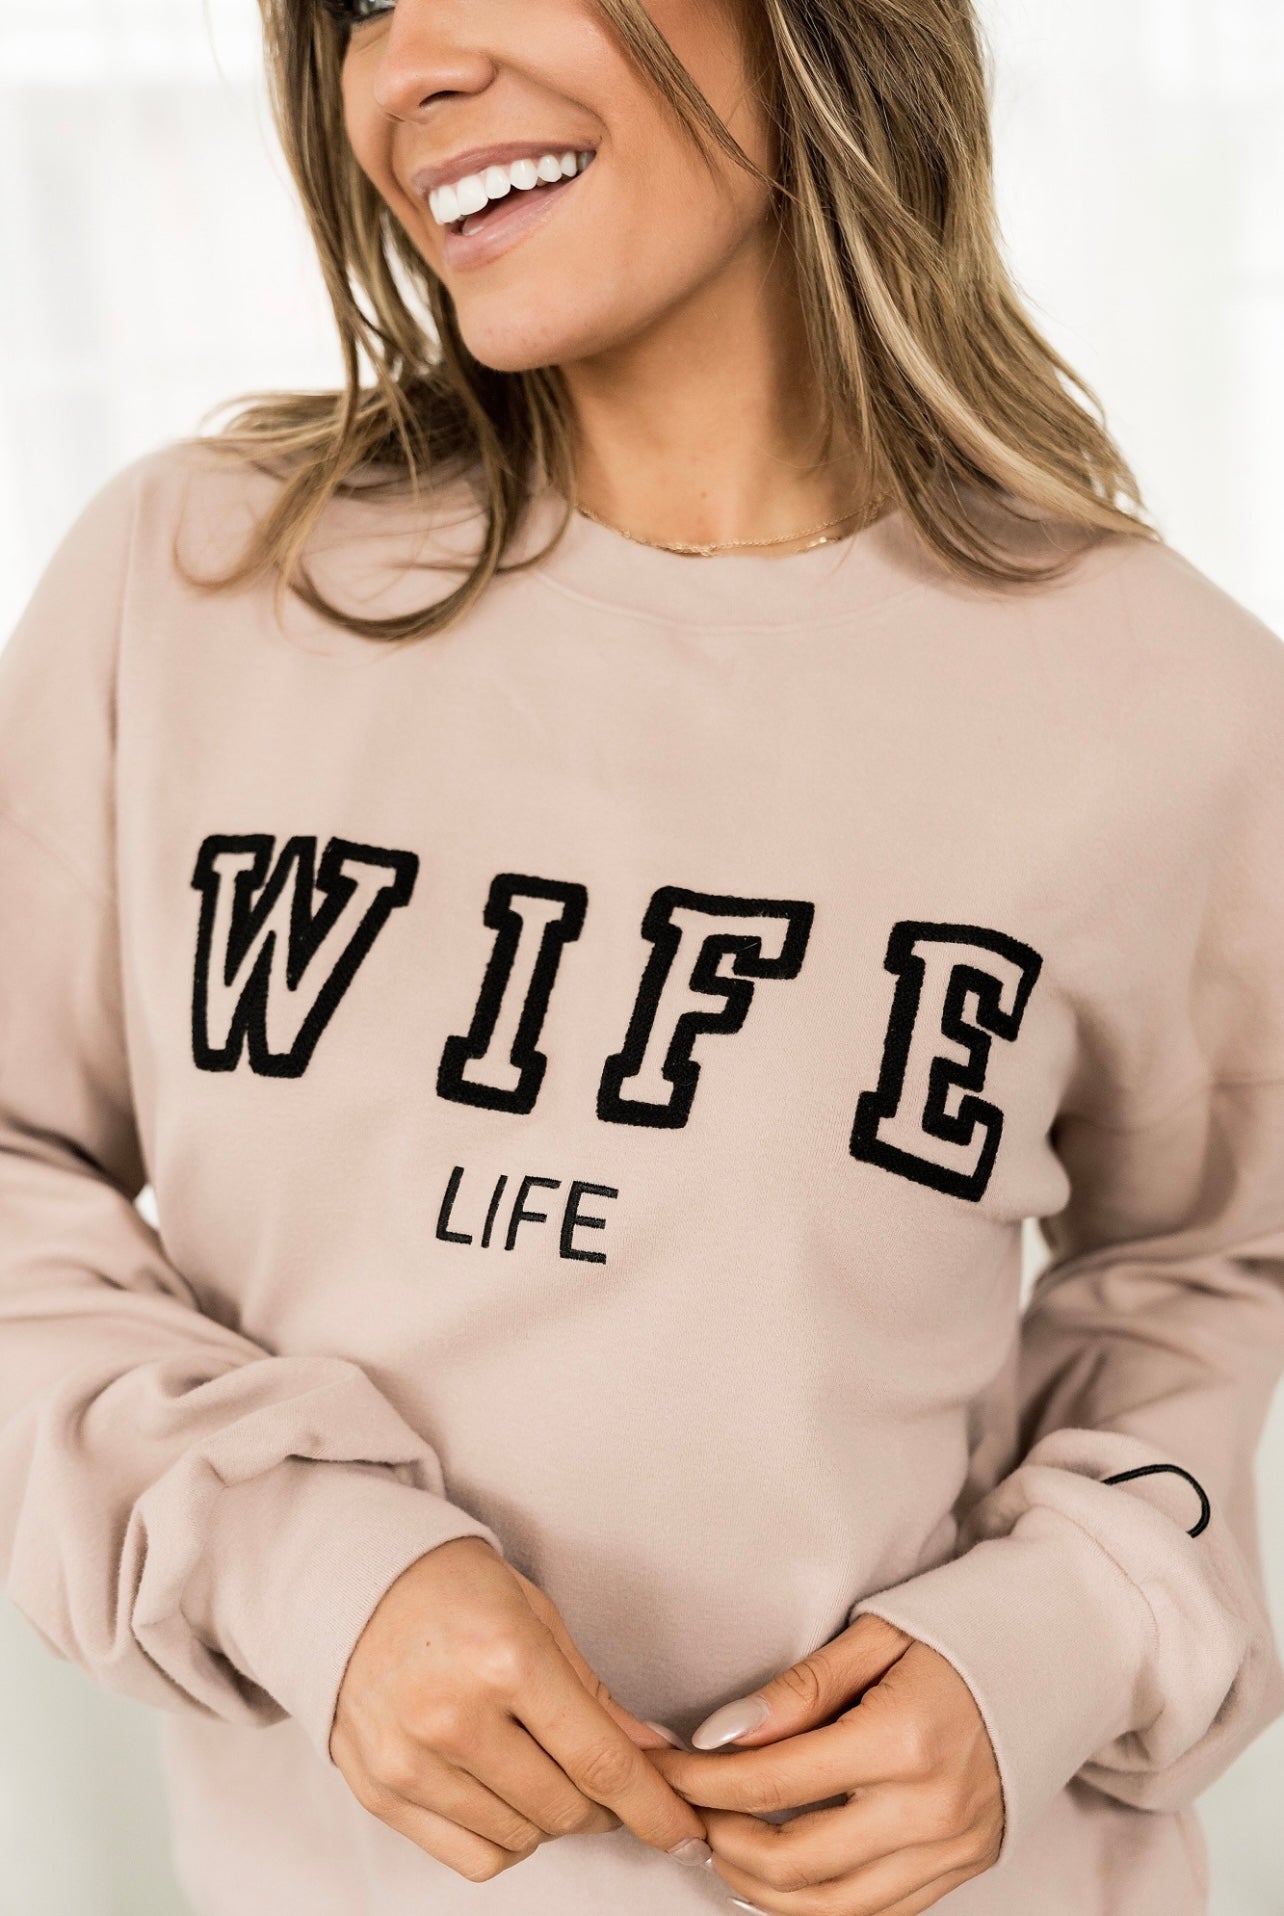 & Ave- University Pull Over- Wife Life